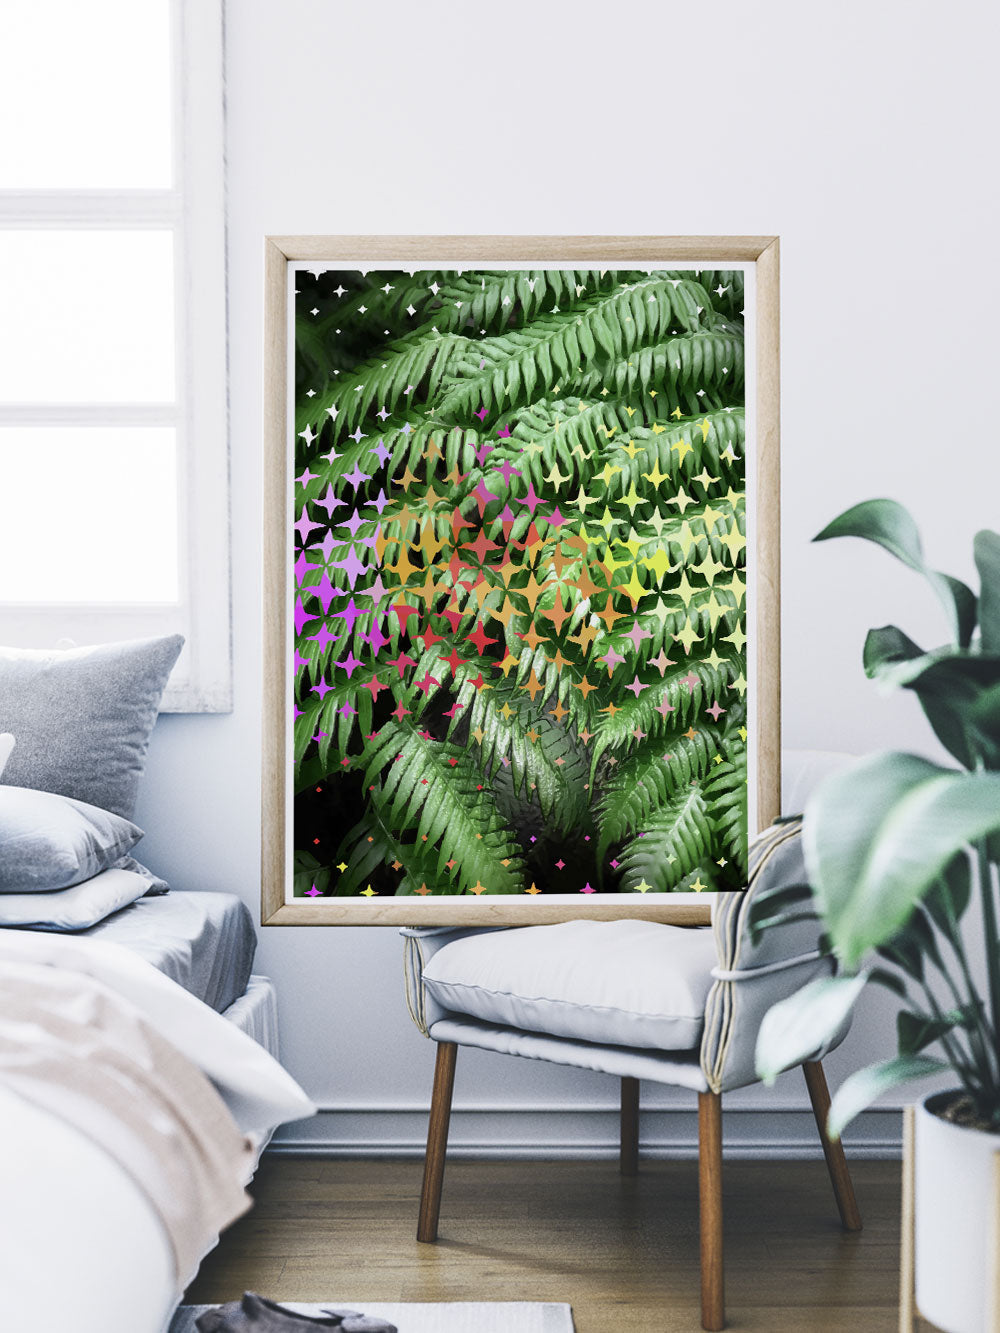 Tropicalia 3 Poster Print with Palm Leaves